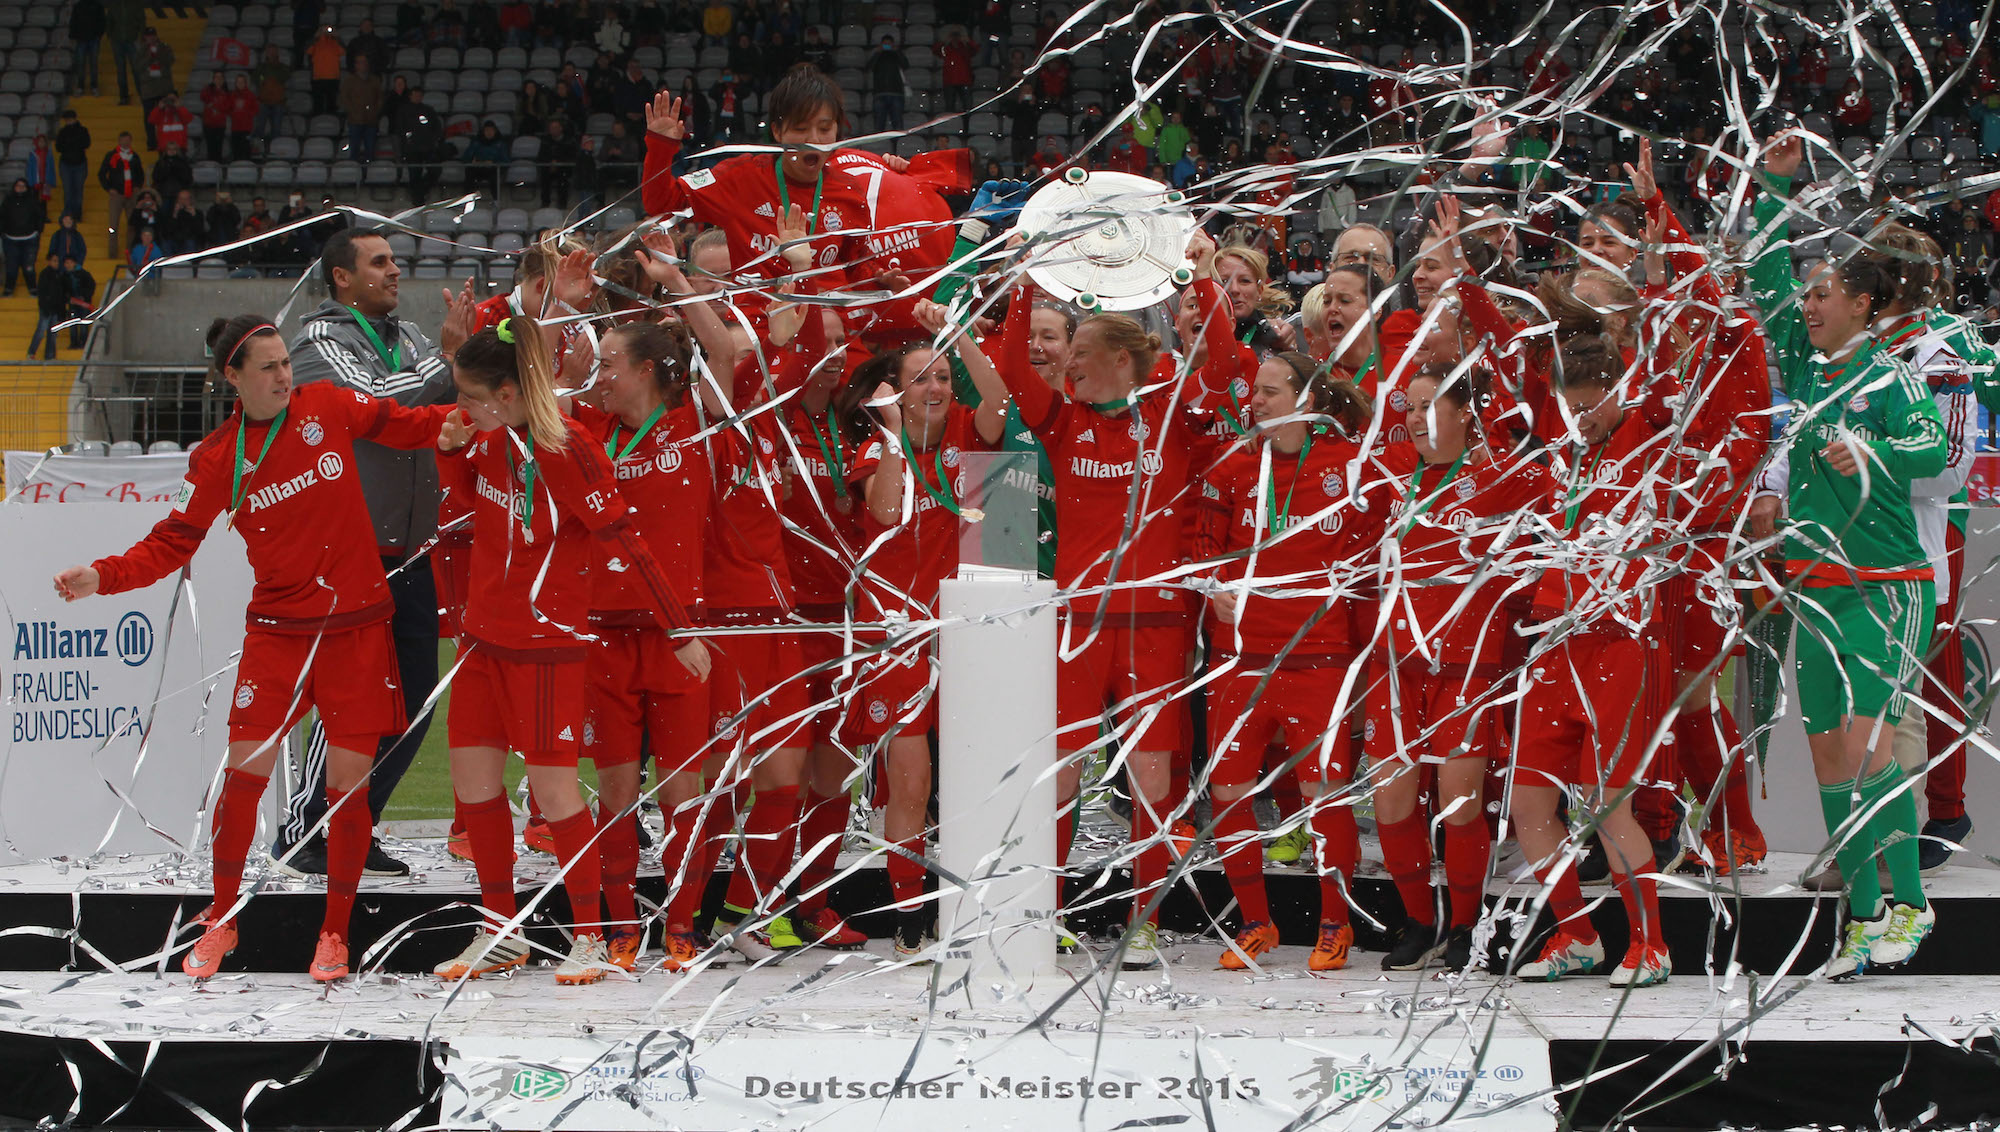 The team defends the Bundesliga title in 2016